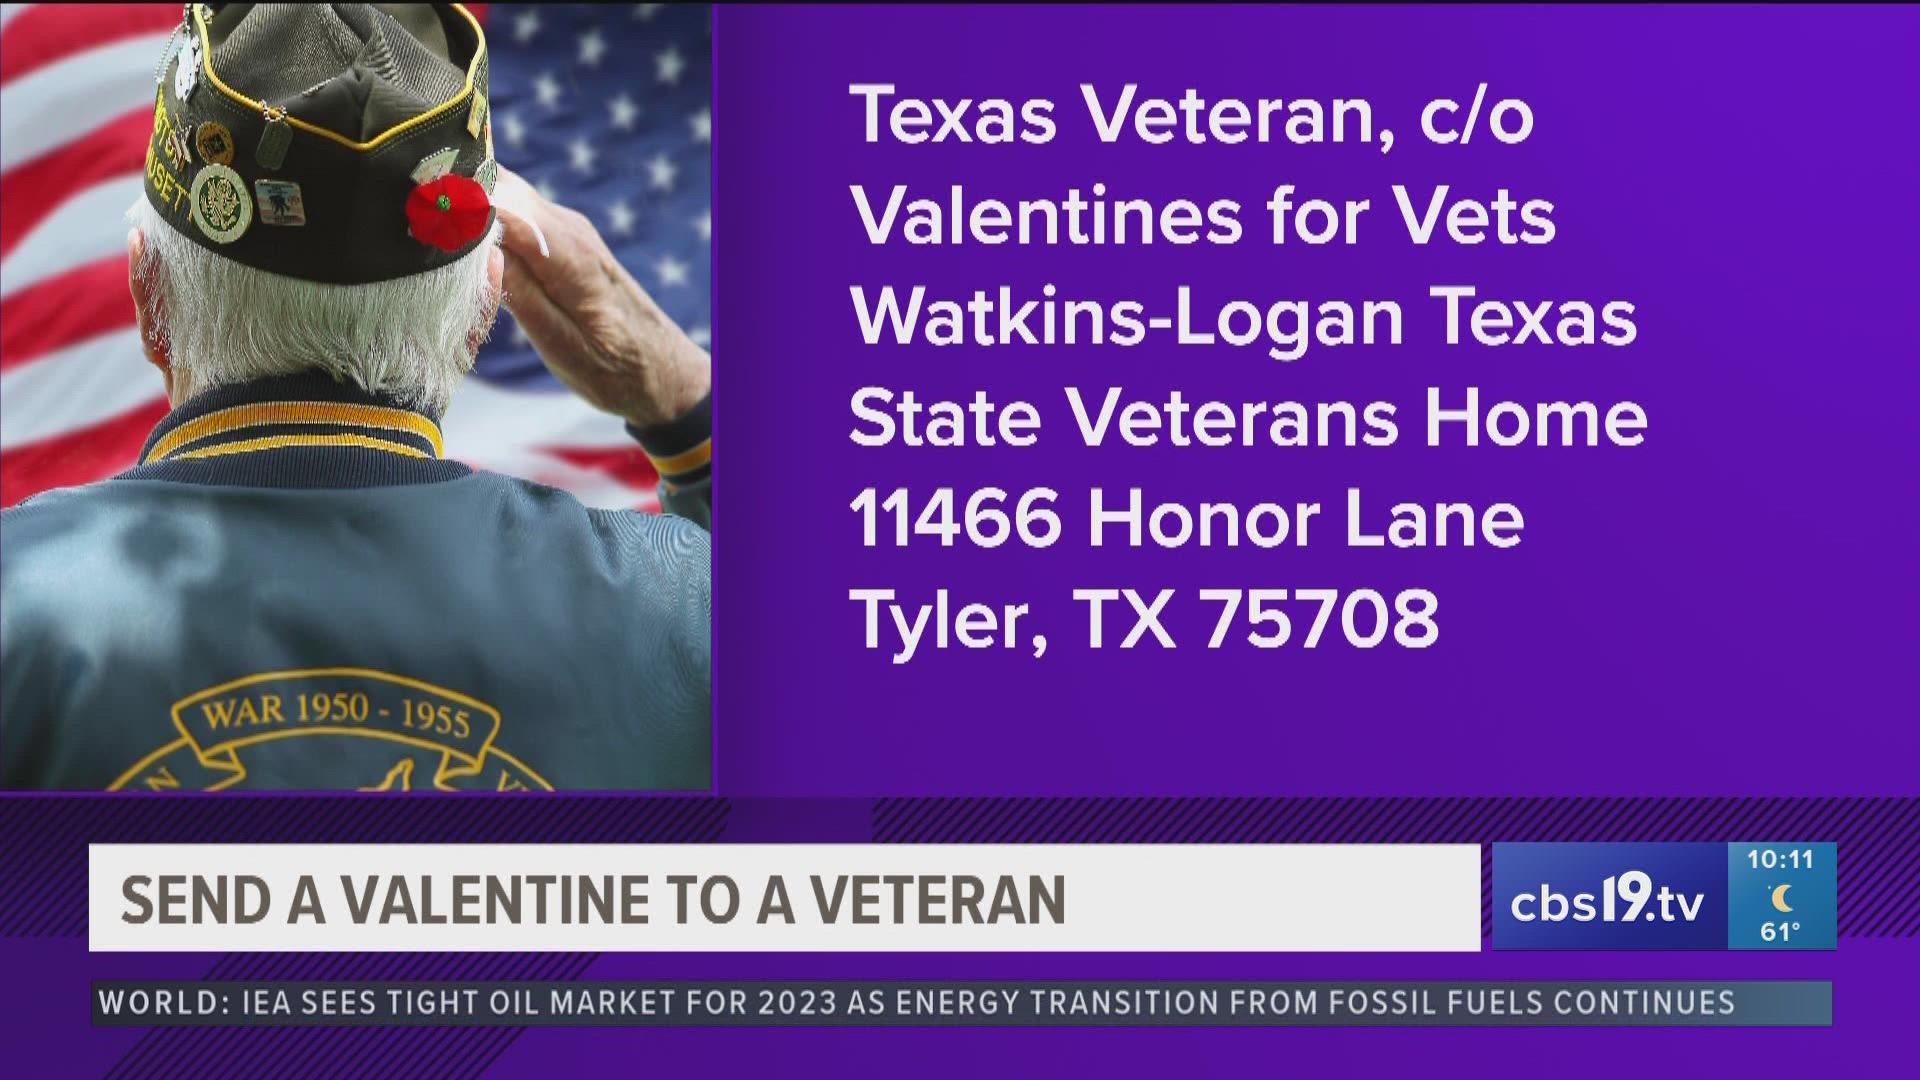 Watkins-Logan Veterans Home in Tyler is seeking Valentine's Day cards for its residents.